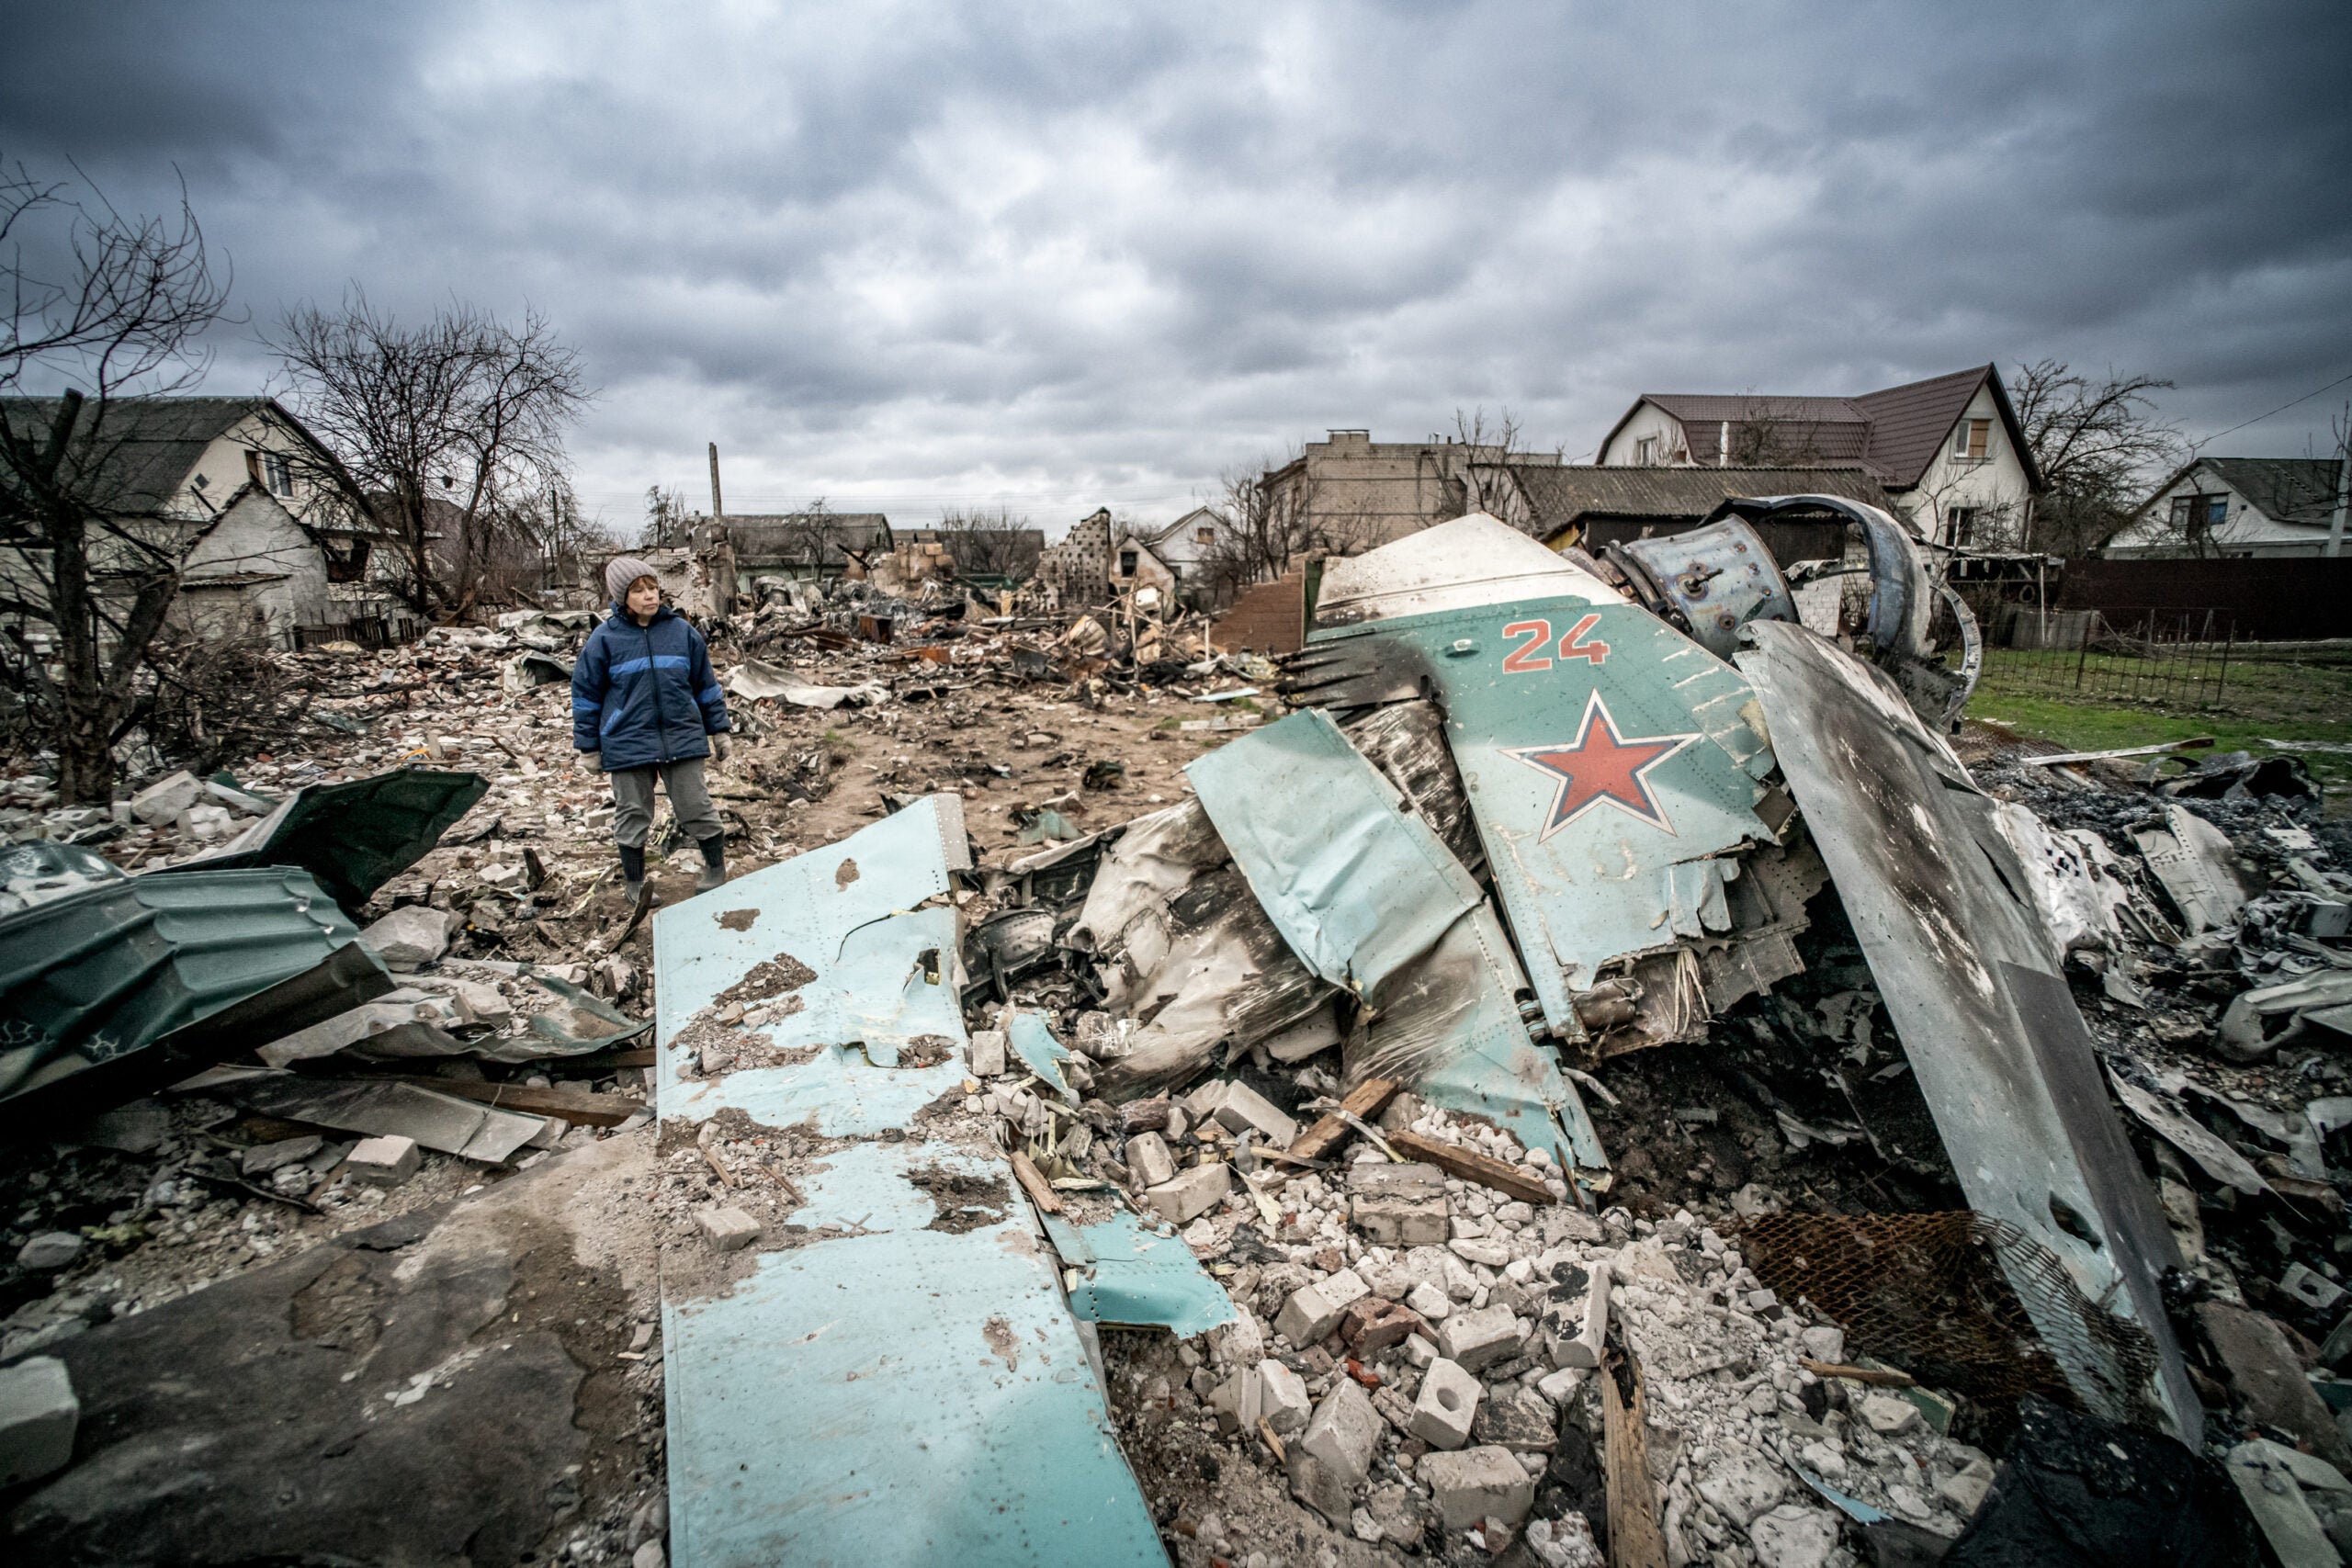 Chernihiv, Kiev Oblast, A Russian Sukhoi Su-34 shot down by Ukrainian anti-aircraft guns crashed in a residential area of __Chernihiv. The pilot, who managed to eject himself, was captured, his navigator killed. (Photo by: Nicola Marfisi/AGF/Universal Images Group via Getty Images)